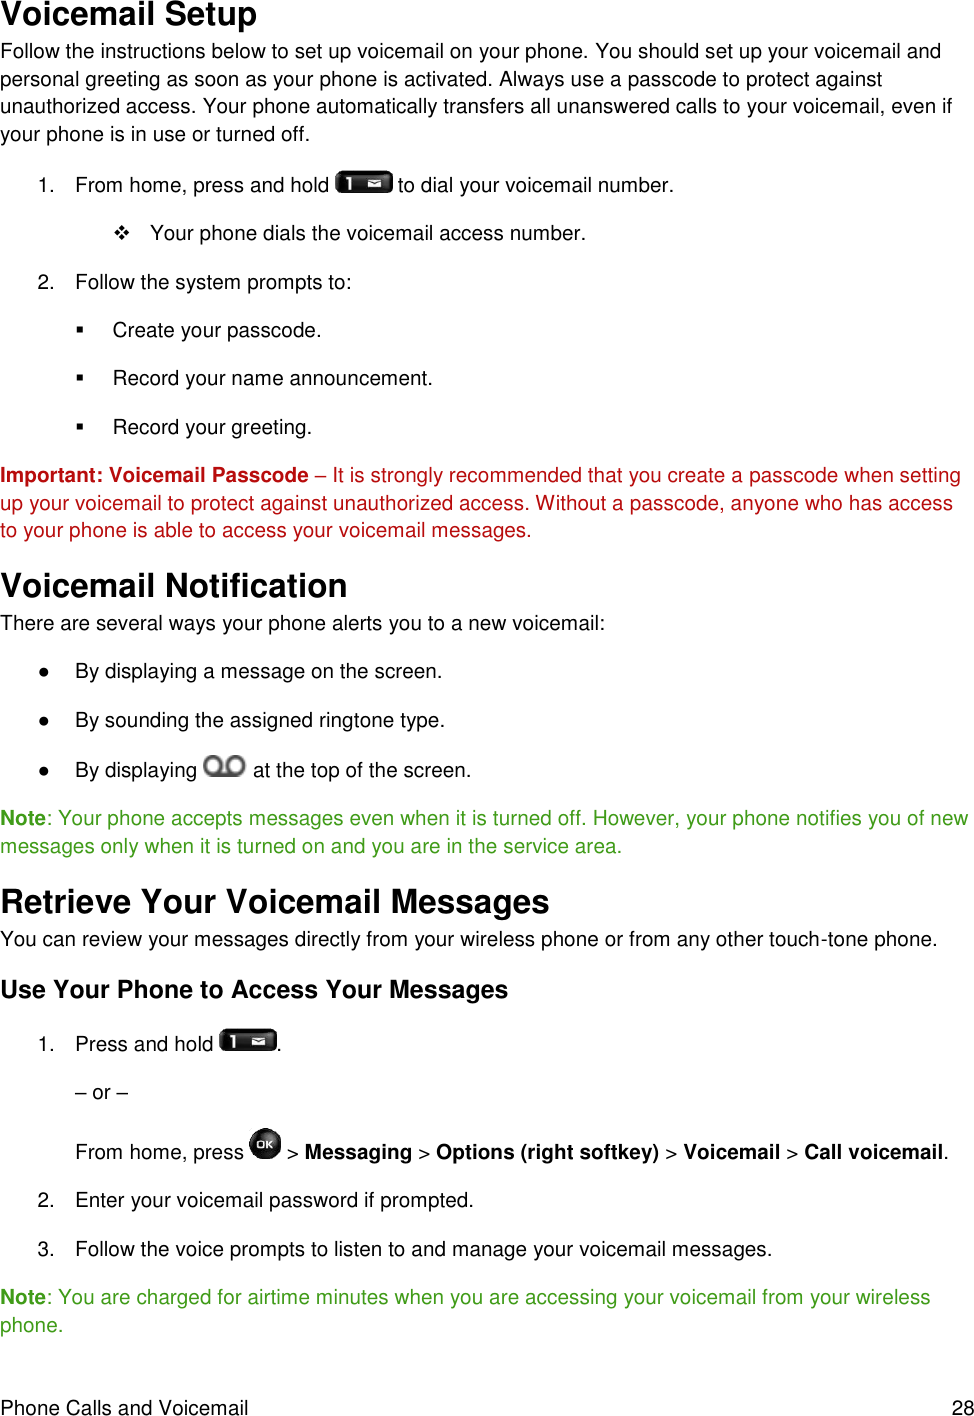 Phone Calls and Voicemail  28 Voicemail Setup  Follow the instructions below to set up voicemail on your phone. You should set up your voicemail and personal greeting as soon as your phone is activated. Always use a passcode to protect against unauthorized access. Your phone automatically transfers all unanswered calls to your voicemail, even if your phone is in use or turned off. 1.  From home, press and hold   to dial your voicemail number.   Your phone dials the voicemail access number. 2.  Follow the system prompts to:   Create your passcode.   Record your name announcement.   Record your greeting. Important: Voicemail Passcode – It is strongly recommended that you create a passcode when setting up your voicemail to protect against unauthorized access. Without a passcode, anyone who has access to your phone is able to access your voicemail messages. Voicemail Notification  There are several ways your phone alerts you to a new voicemail: ●  By displaying a message on the screen. ●  By sounding the assigned ringtone type. ●  By displaying   at the top of the screen. Note: Your phone accepts messages even when it is turned off. However, your phone notifies you of new messages only when it is turned on and you are in the service area. Retrieve Your Voicemail Messages  You can review your messages directly from your wireless phone or from any other touch-tone phone. Use Your Phone to Access Your Messages 1.  Press and hold  . – or – From home, press   &gt; Messaging &gt; Options (right softkey) &gt; Voicemail &gt; Call voicemail. 2.  Enter your voicemail password if prompted. 3.  Follow the voice prompts to listen to and manage your voicemail messages. Note: You are charged for airtime minutes when you are accessing your voicemail from your wireless phone. 